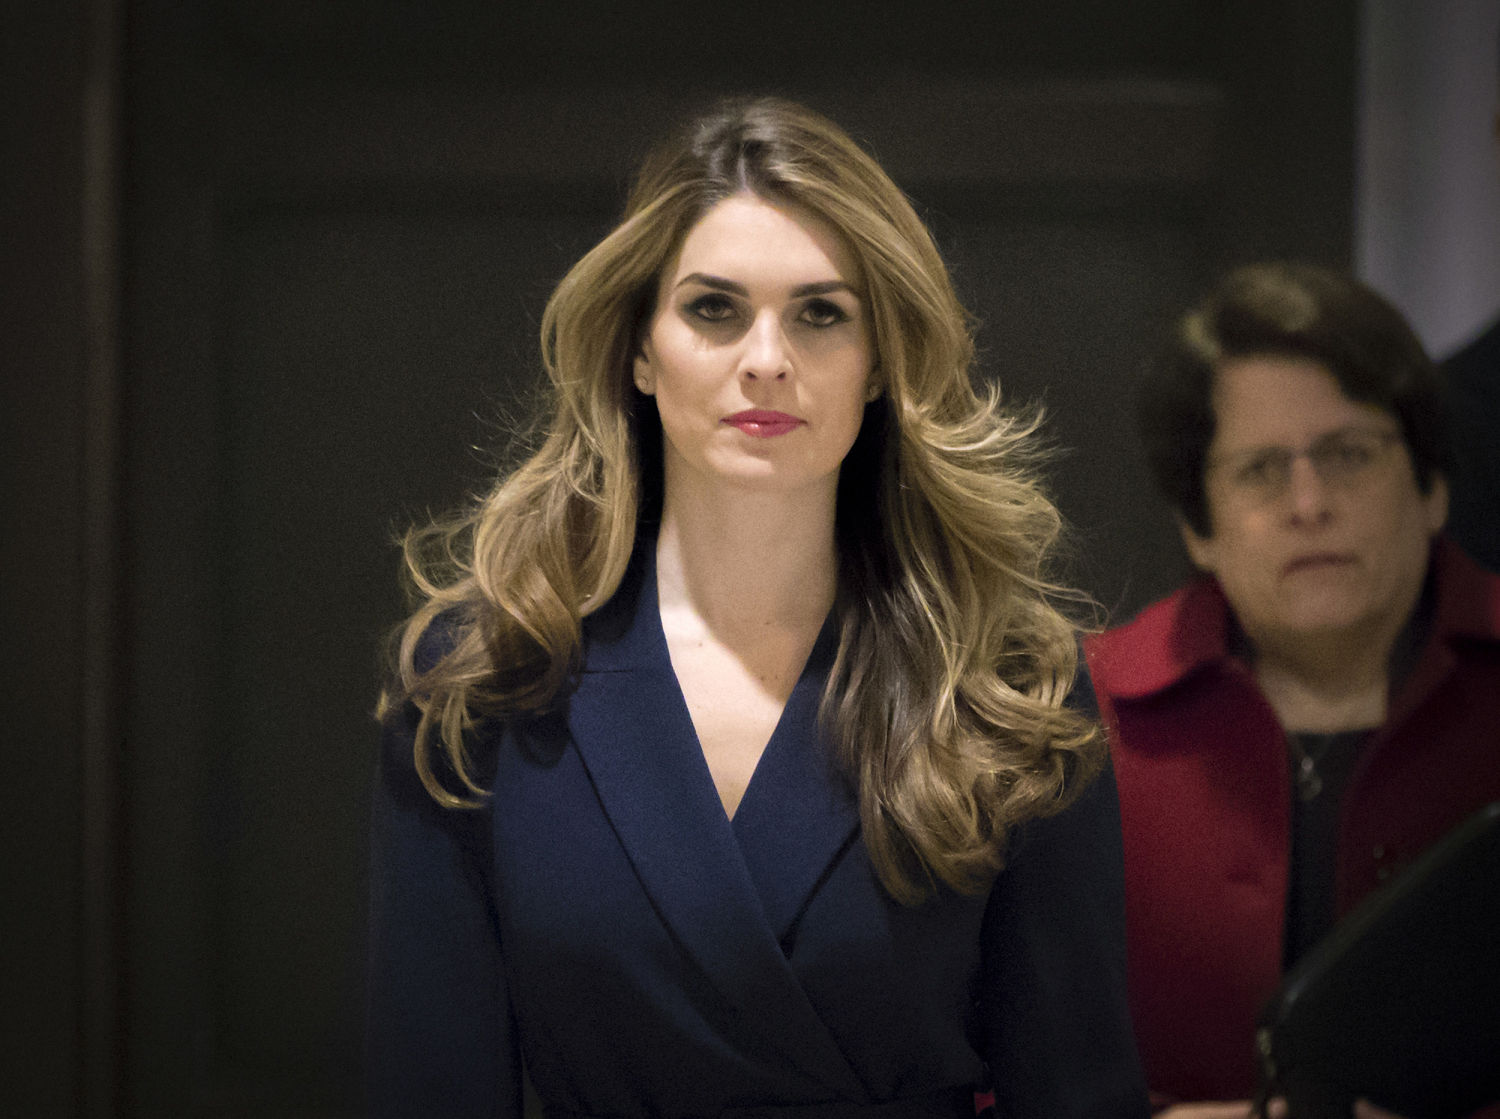 Former Trump senior aide Hope Hicks takes the witness stand